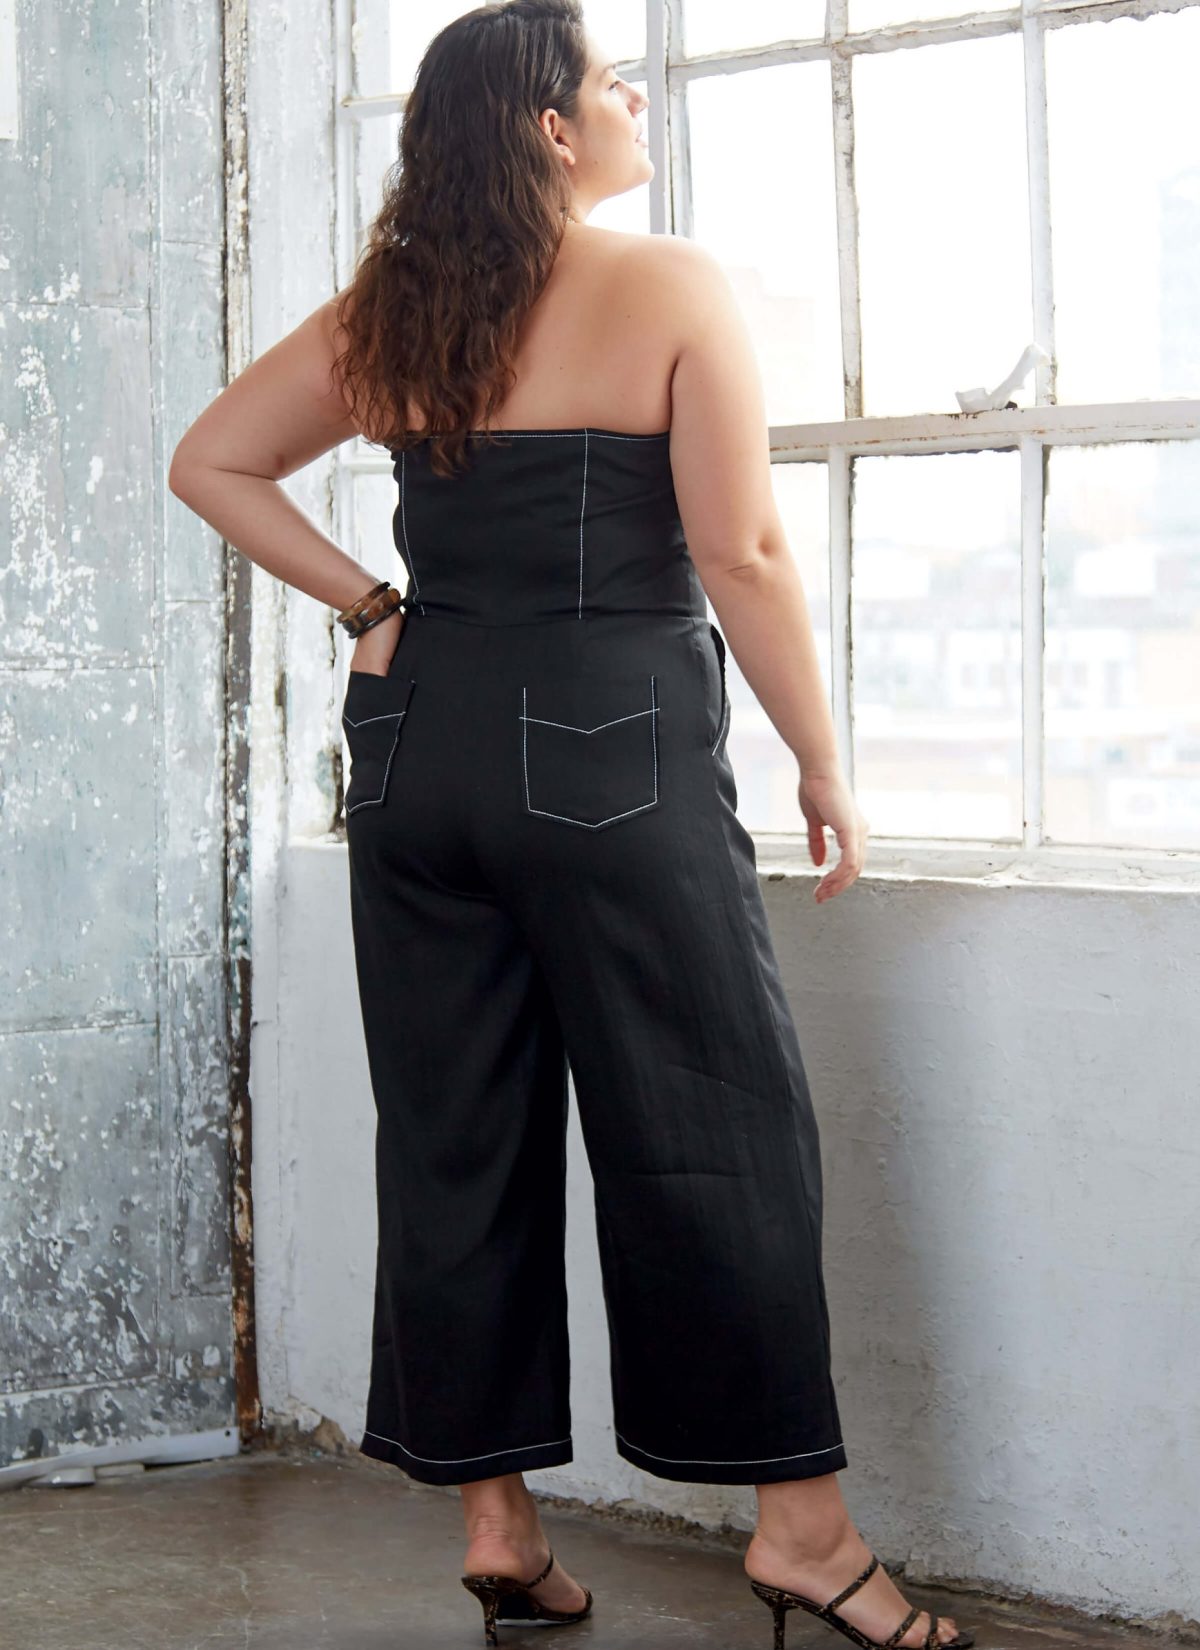 McCall's Sewing Pattern M8101 Misses'& Women's Jumpsuit or Playsuit #NatalaMcCalls